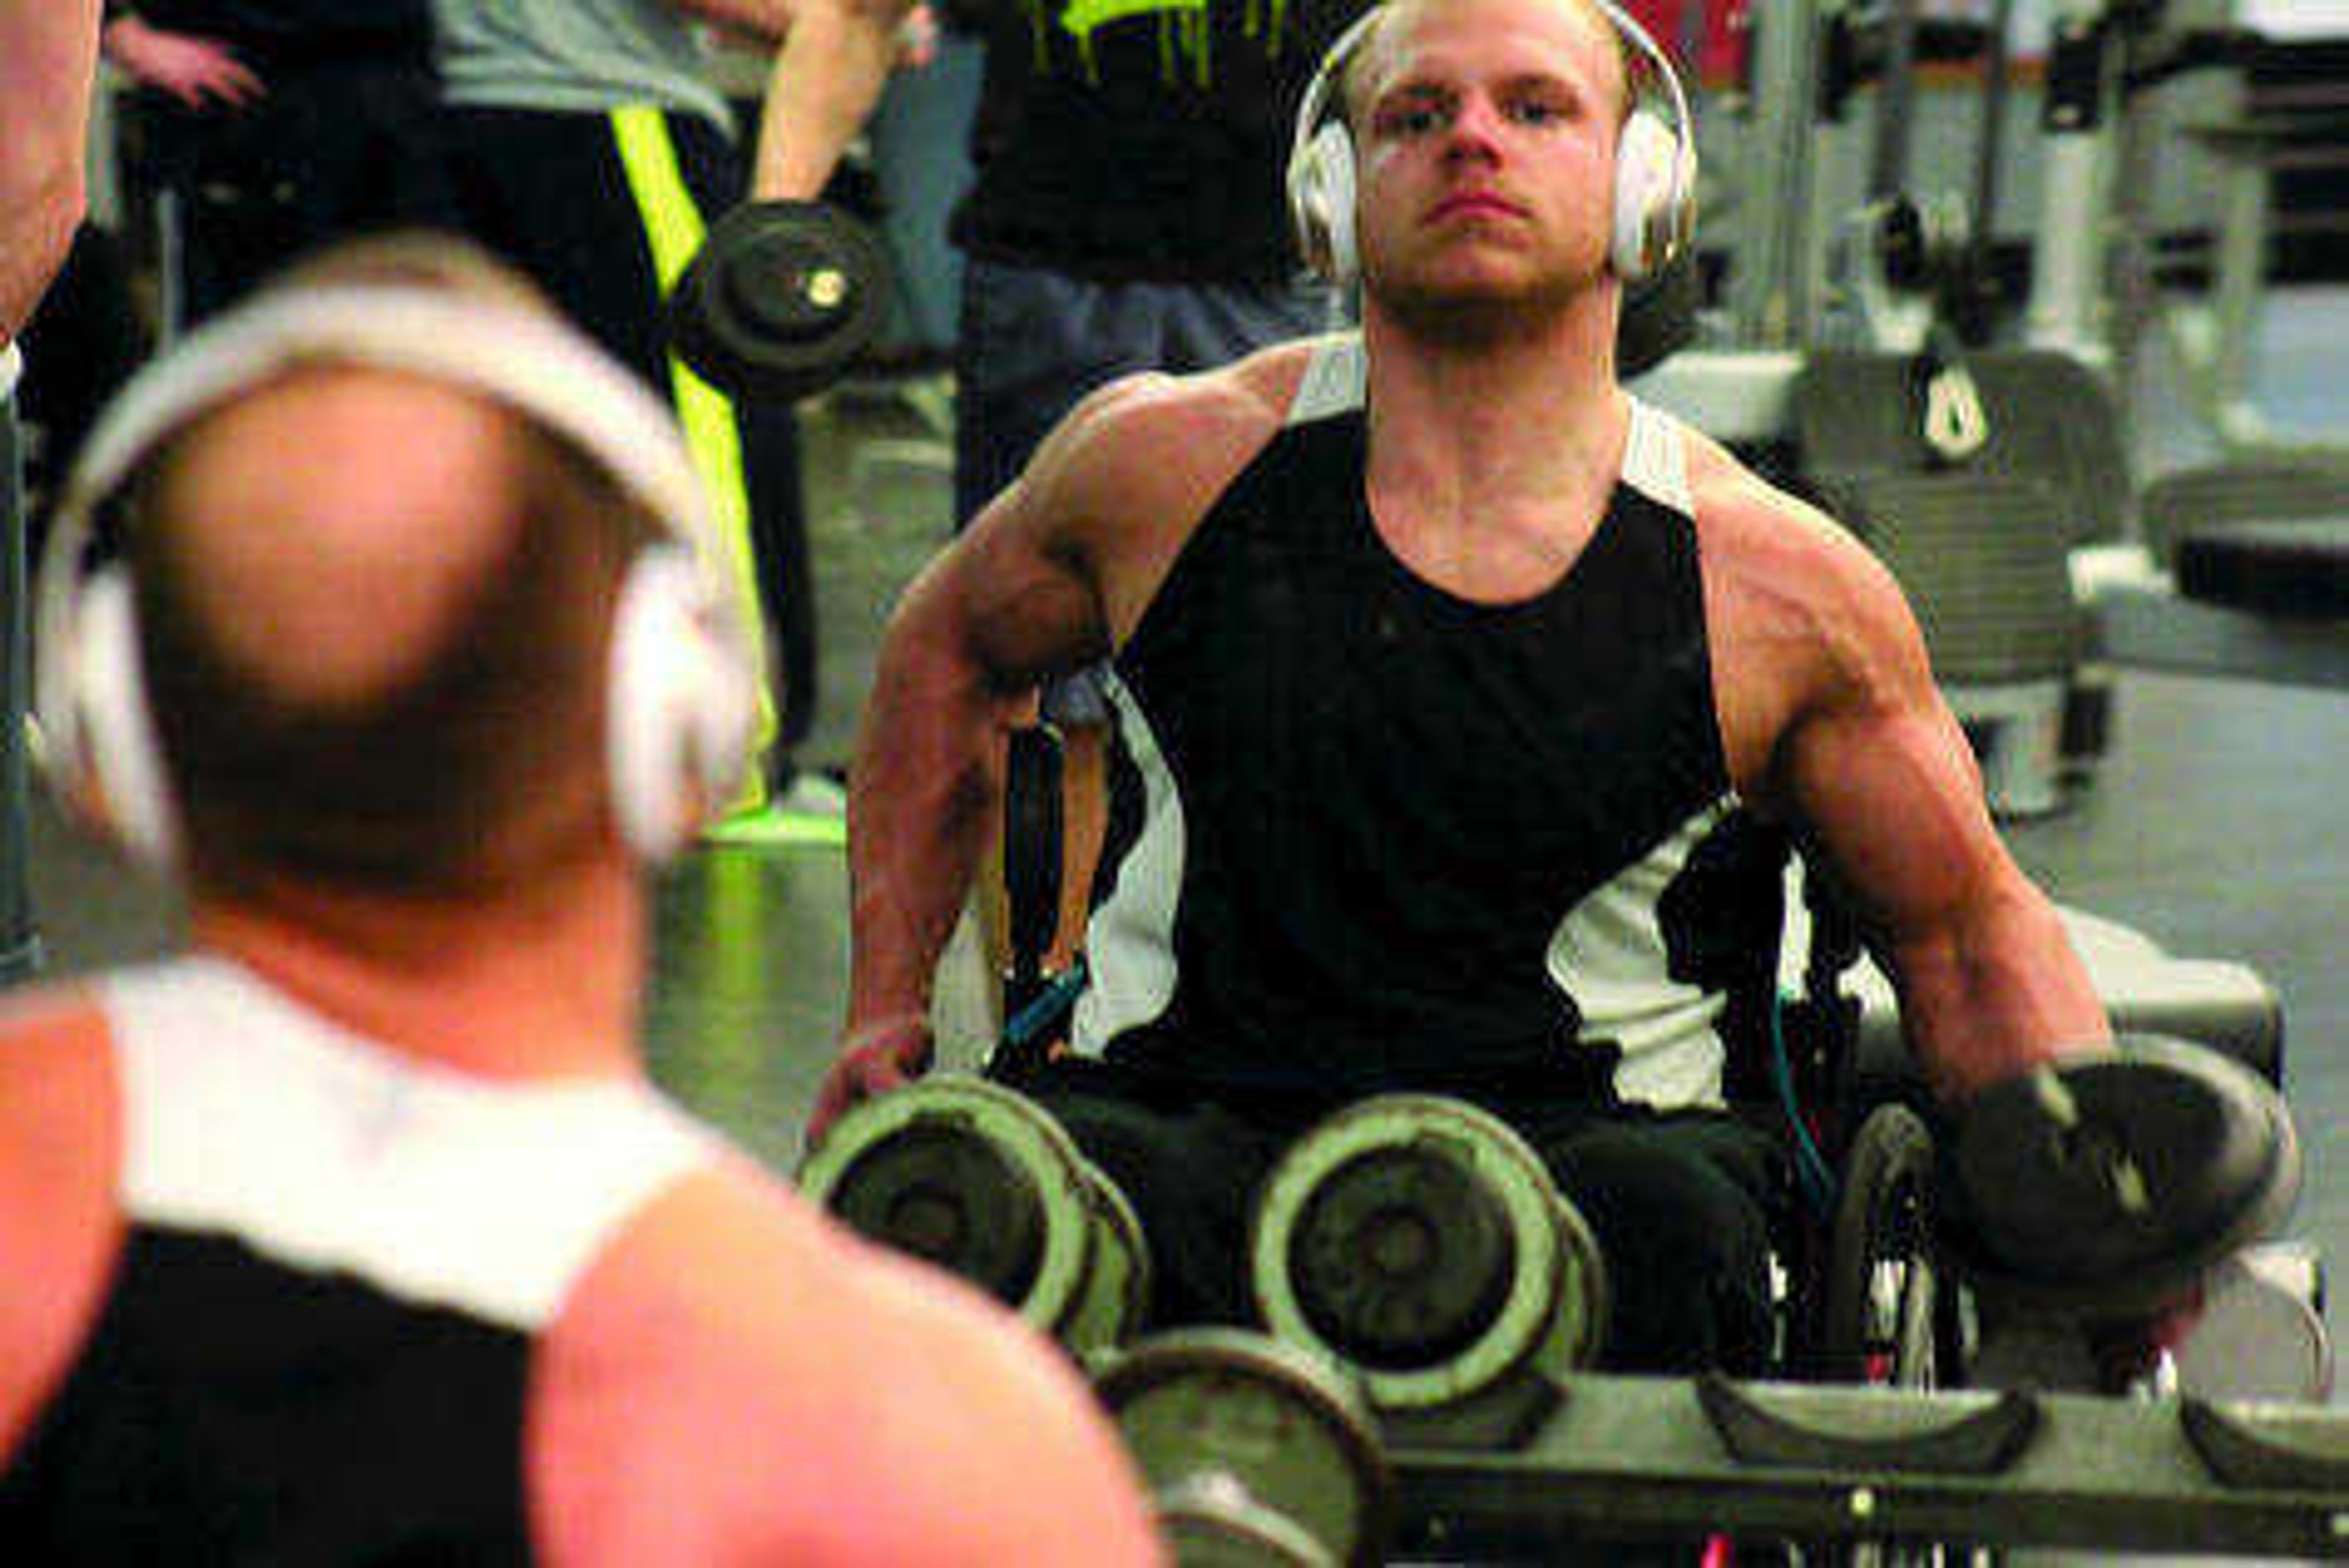 Southeast student excels in power lifting after sustaining injuries